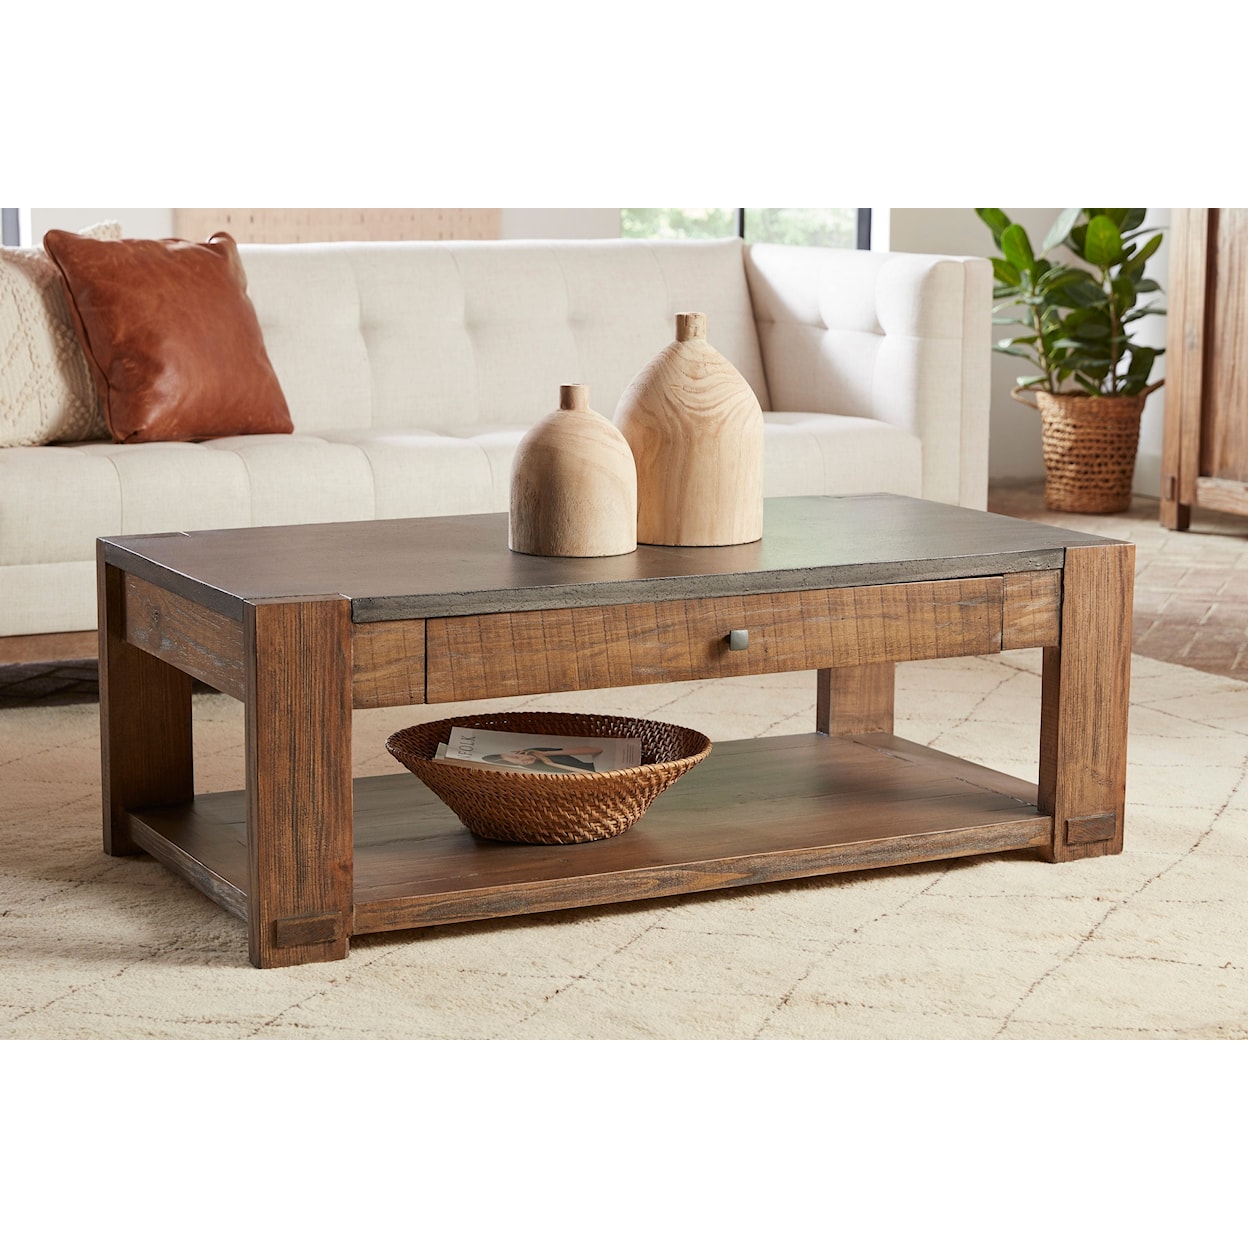 Aspenhome Harlow 1-Drawer Cocktail Table